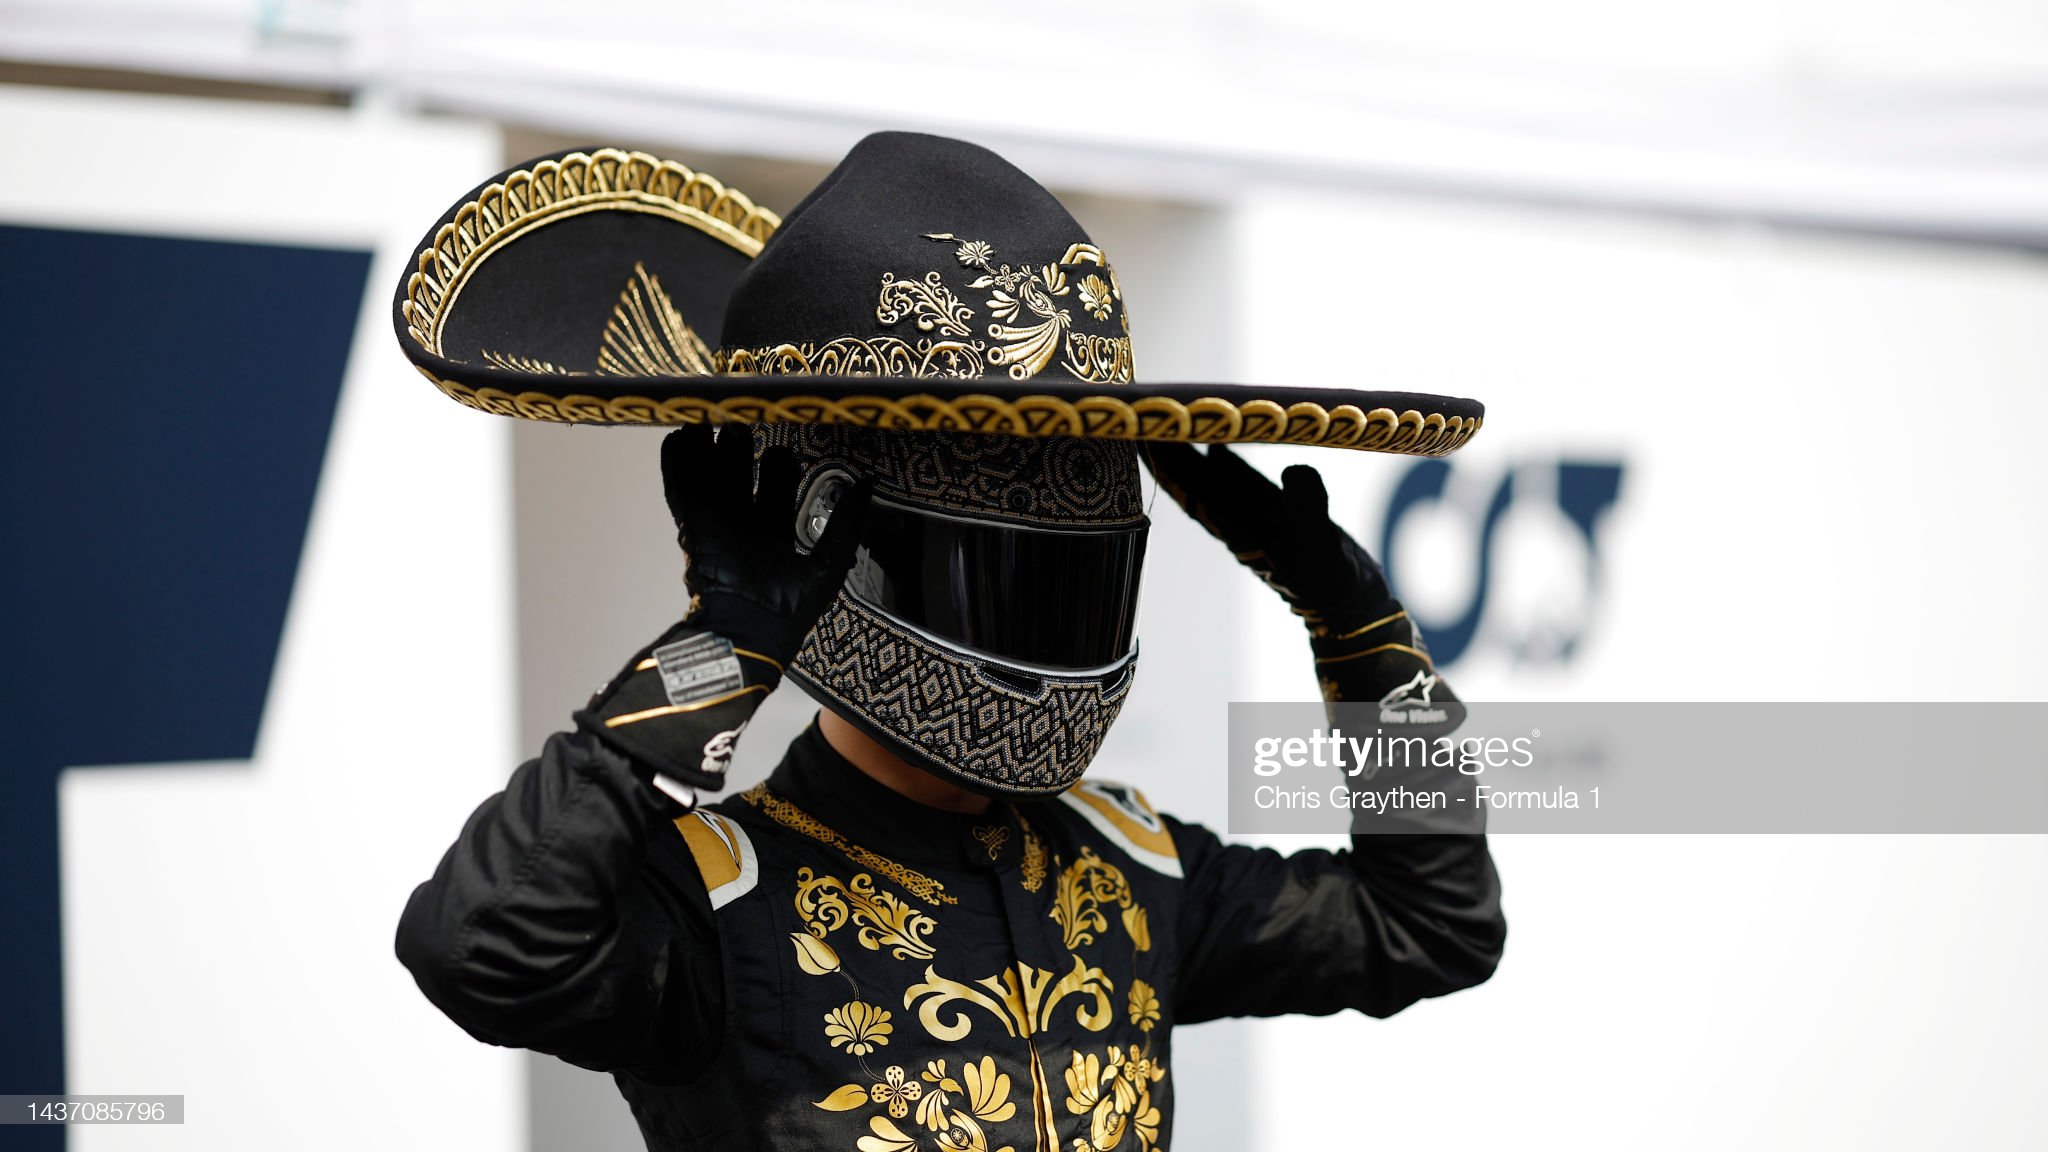 Pierre Gasly of AlphaTauri, dressed as Mario Achi, wears a sombrero in the paddock.